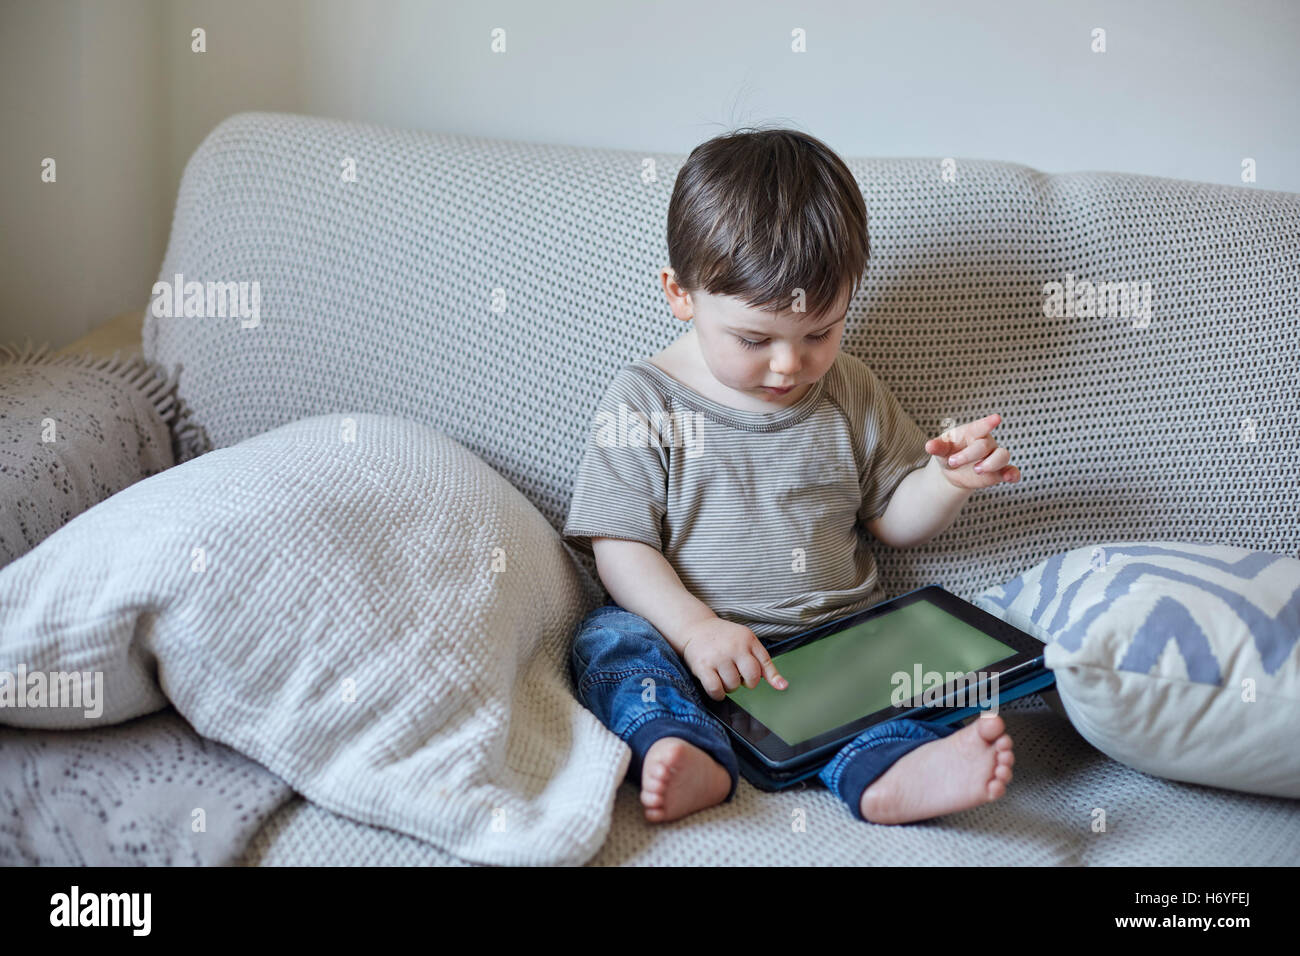 Baby Boy sitting on sofa using digital tablet touchscreen Banque D'Images